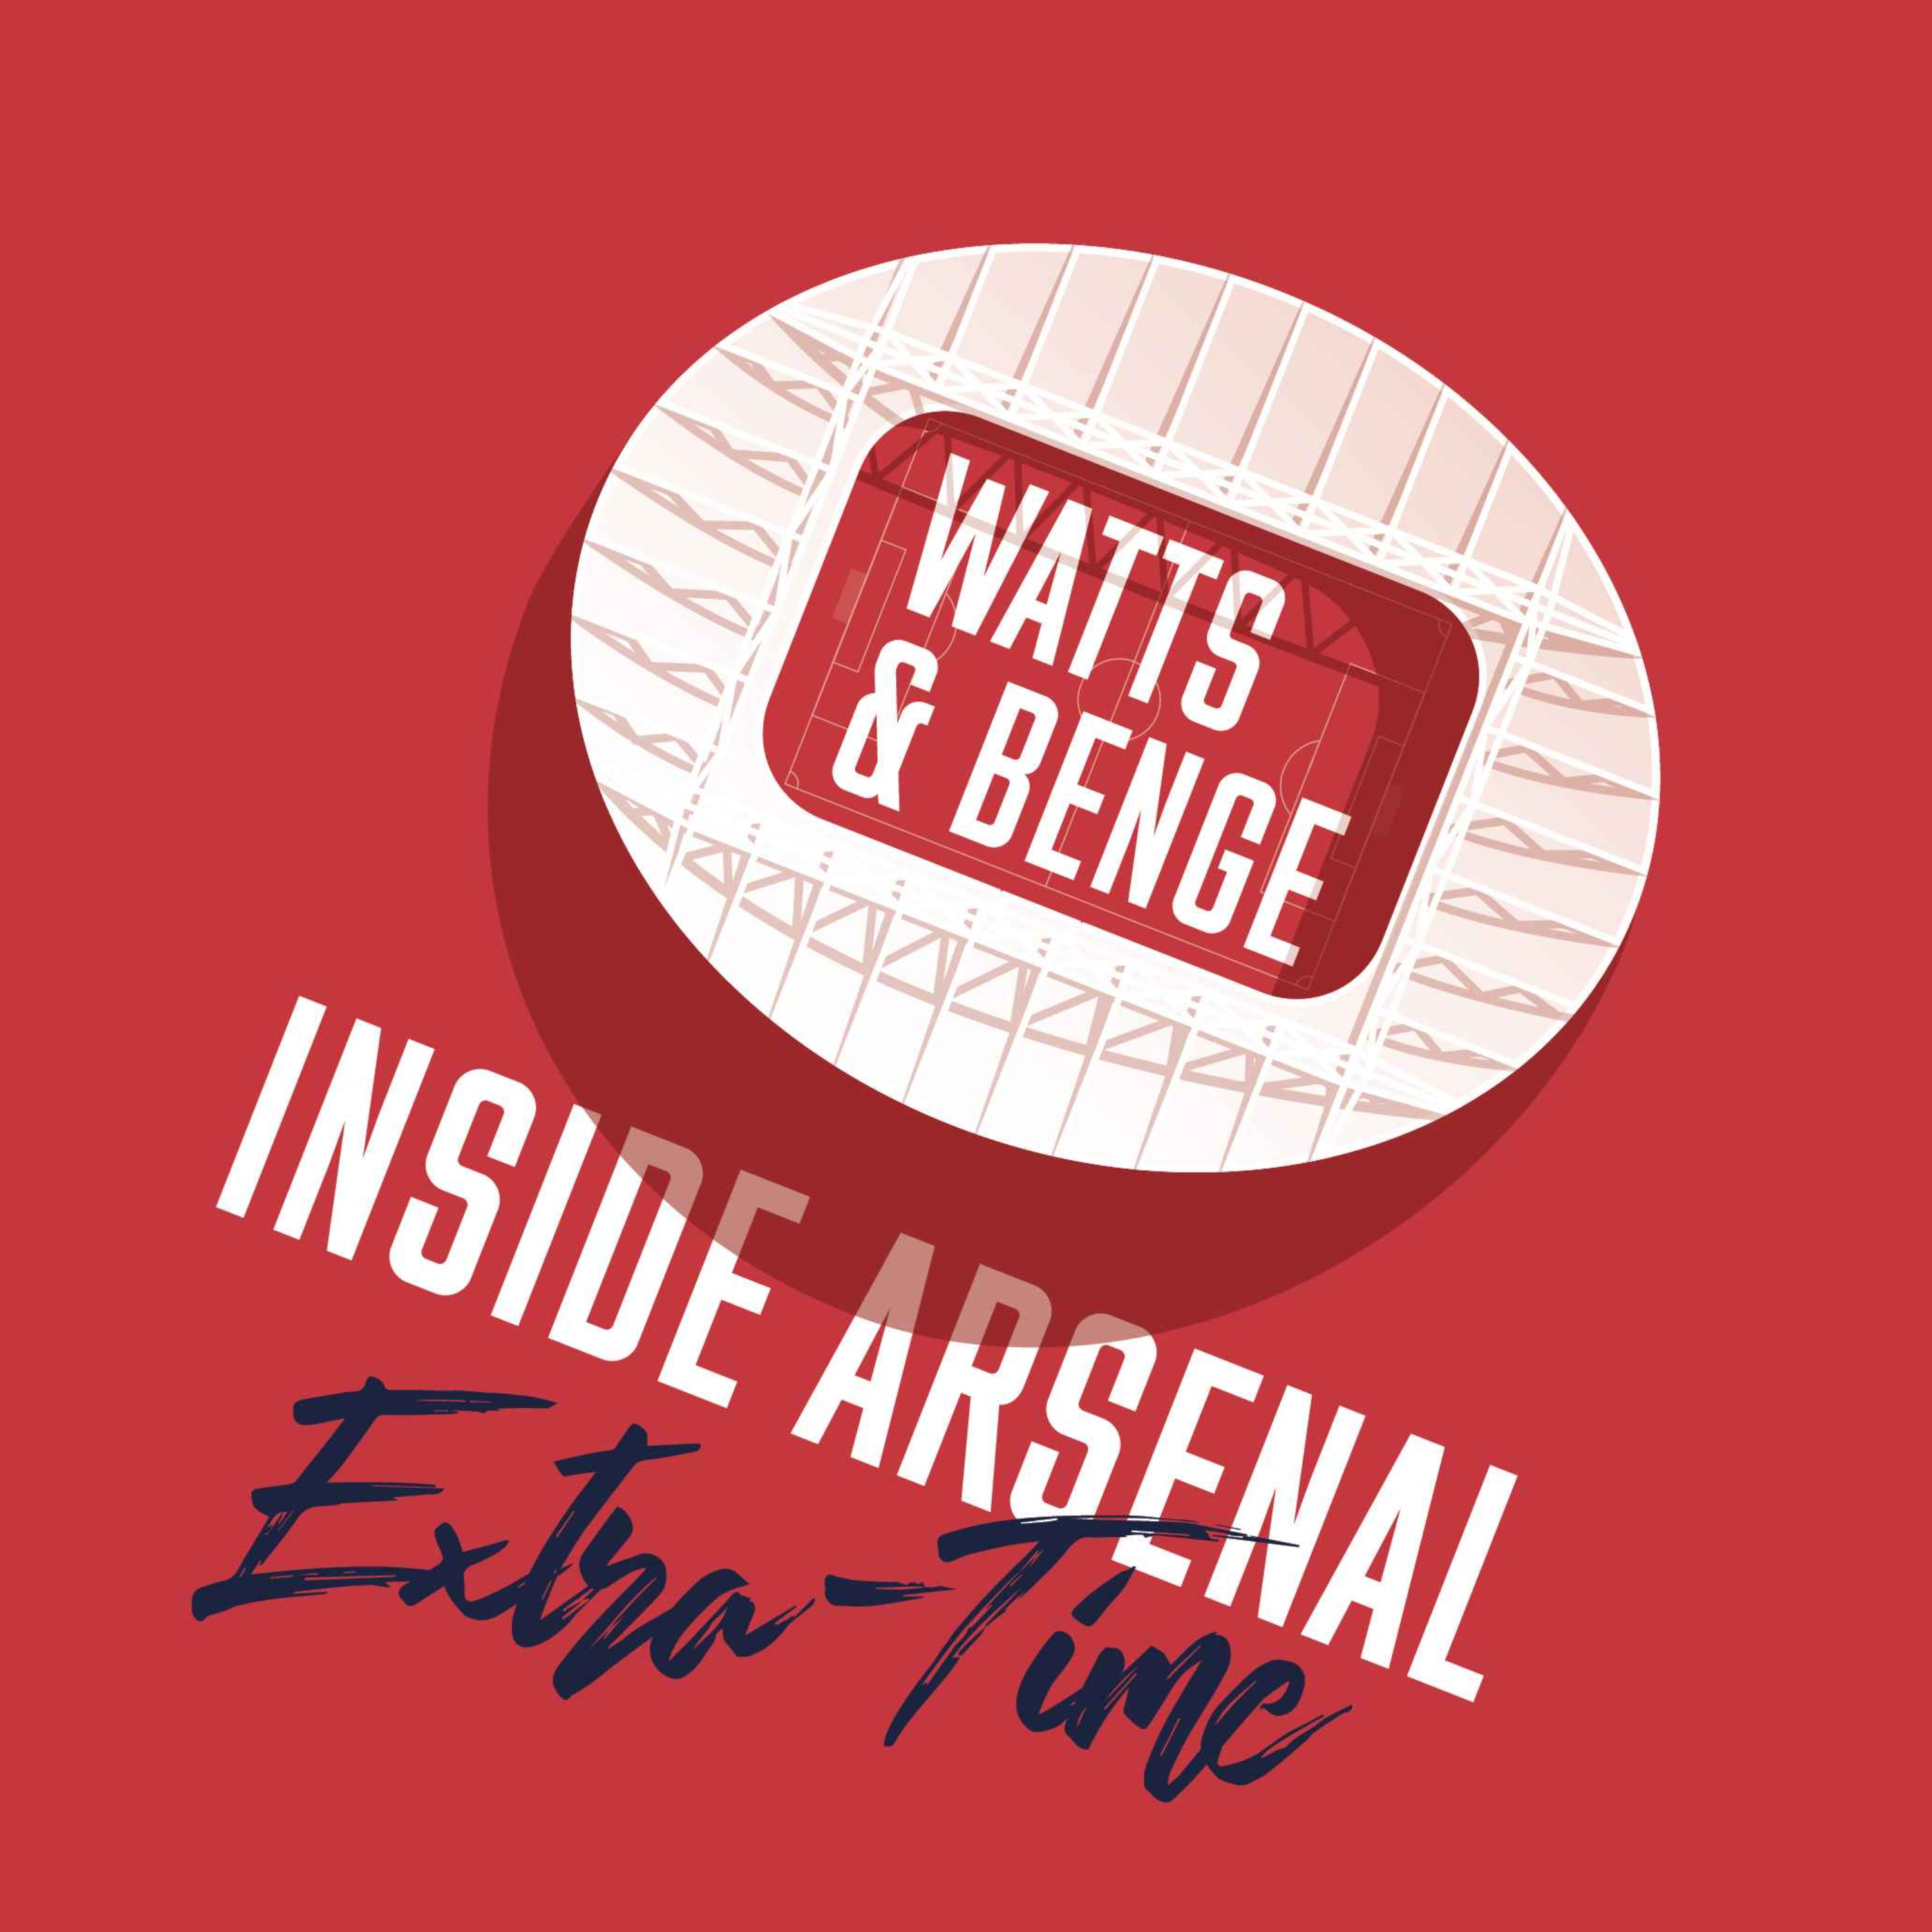 Extra-time with James Benge - Arteta's best XI + transfer latest and Q&A special